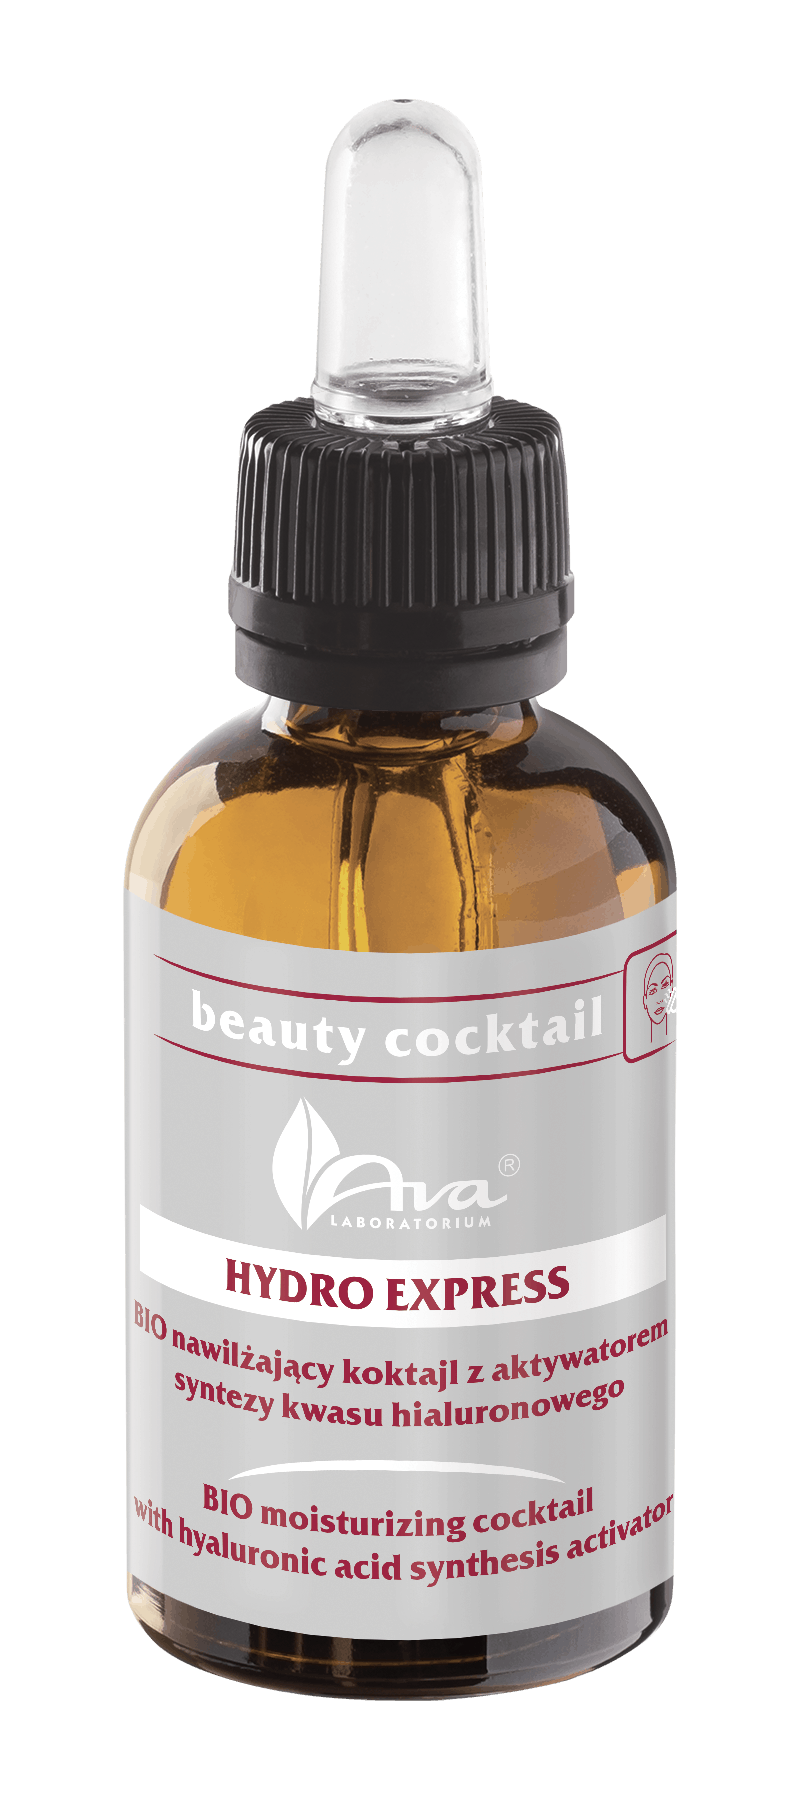 BEAUTY COCKTAIL Hydro express